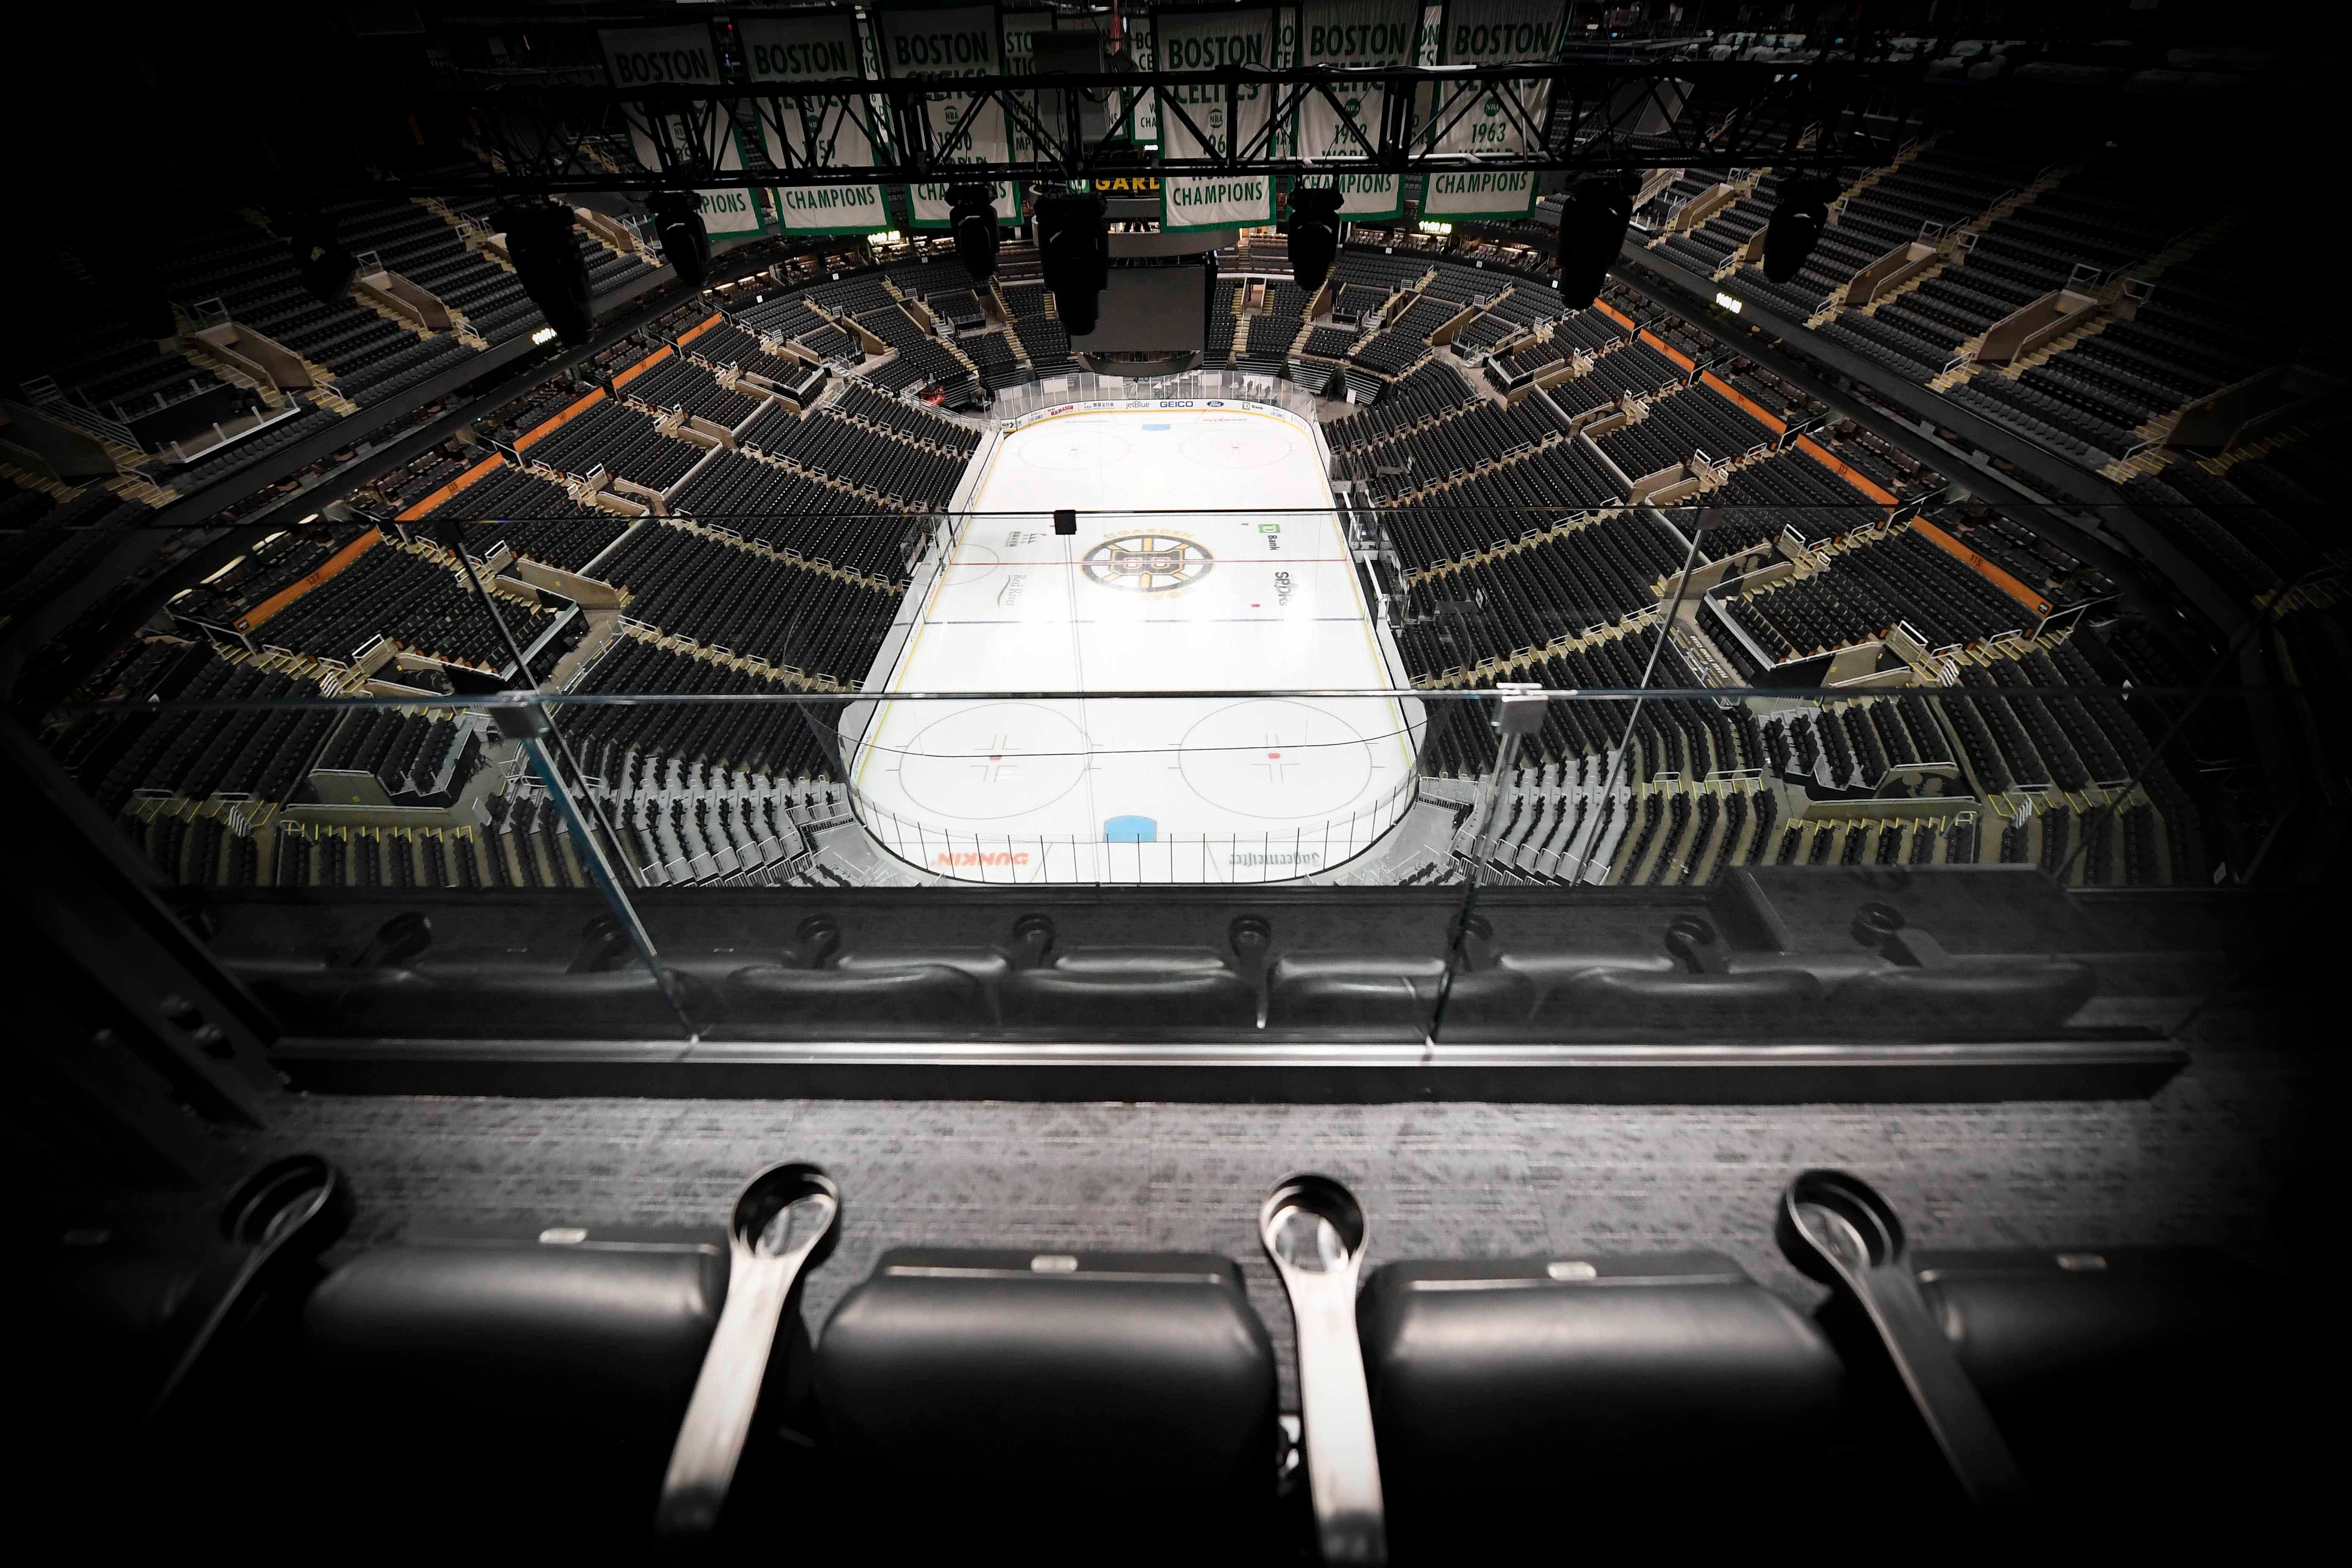 Image of arena from Rafters